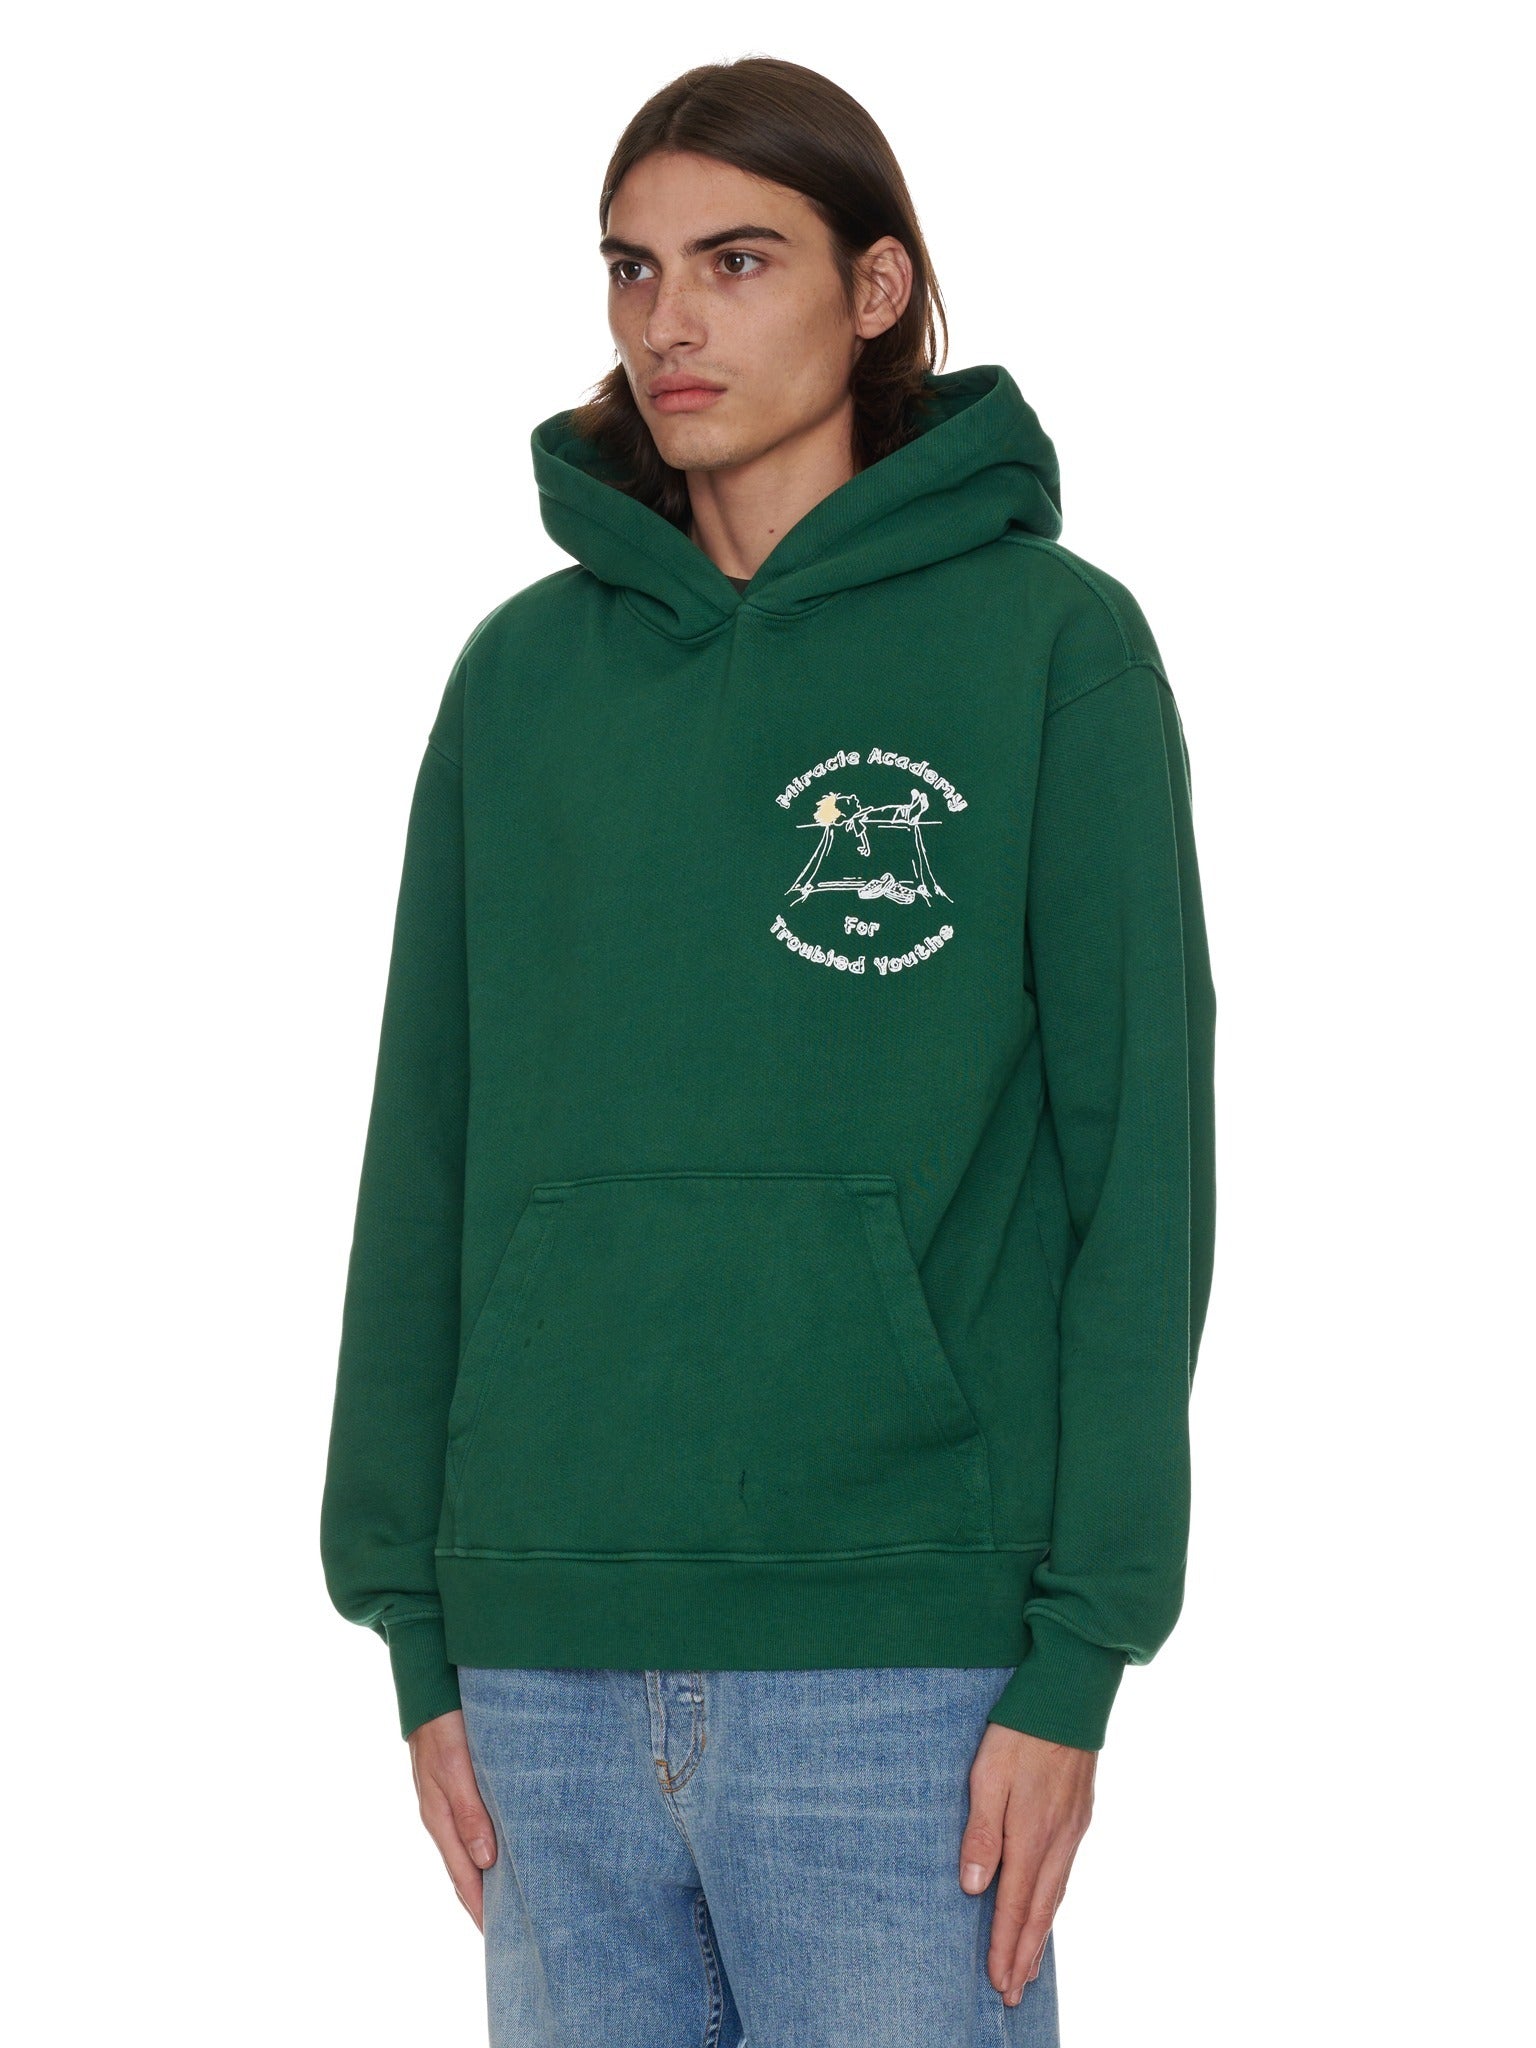 Troubled Youth Academy Hoodie